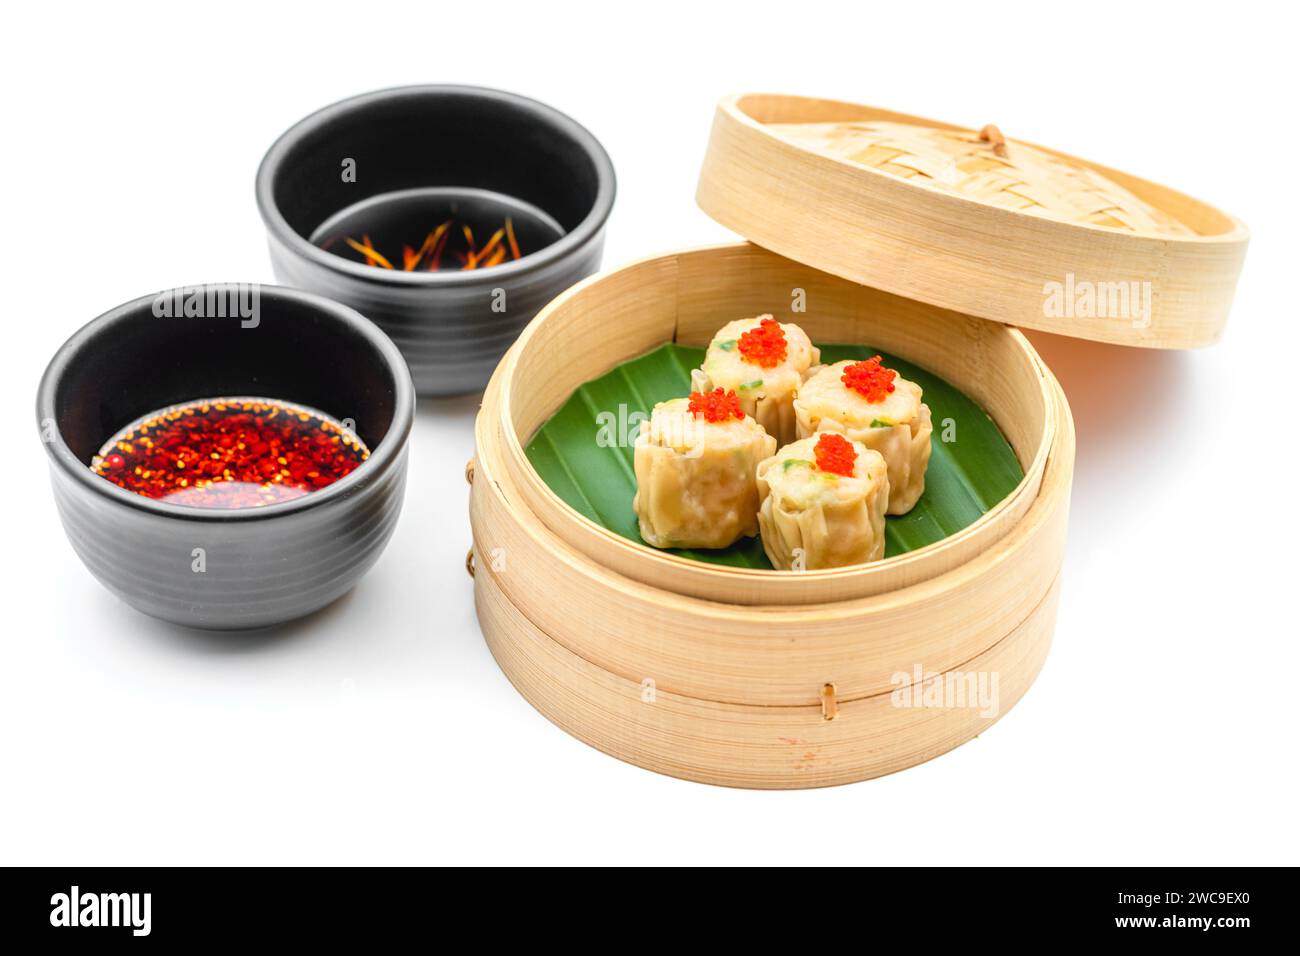 Shumai with shrimp and mushrooms, a traditional Chinese dumpling often served with dim sum Stock Photo